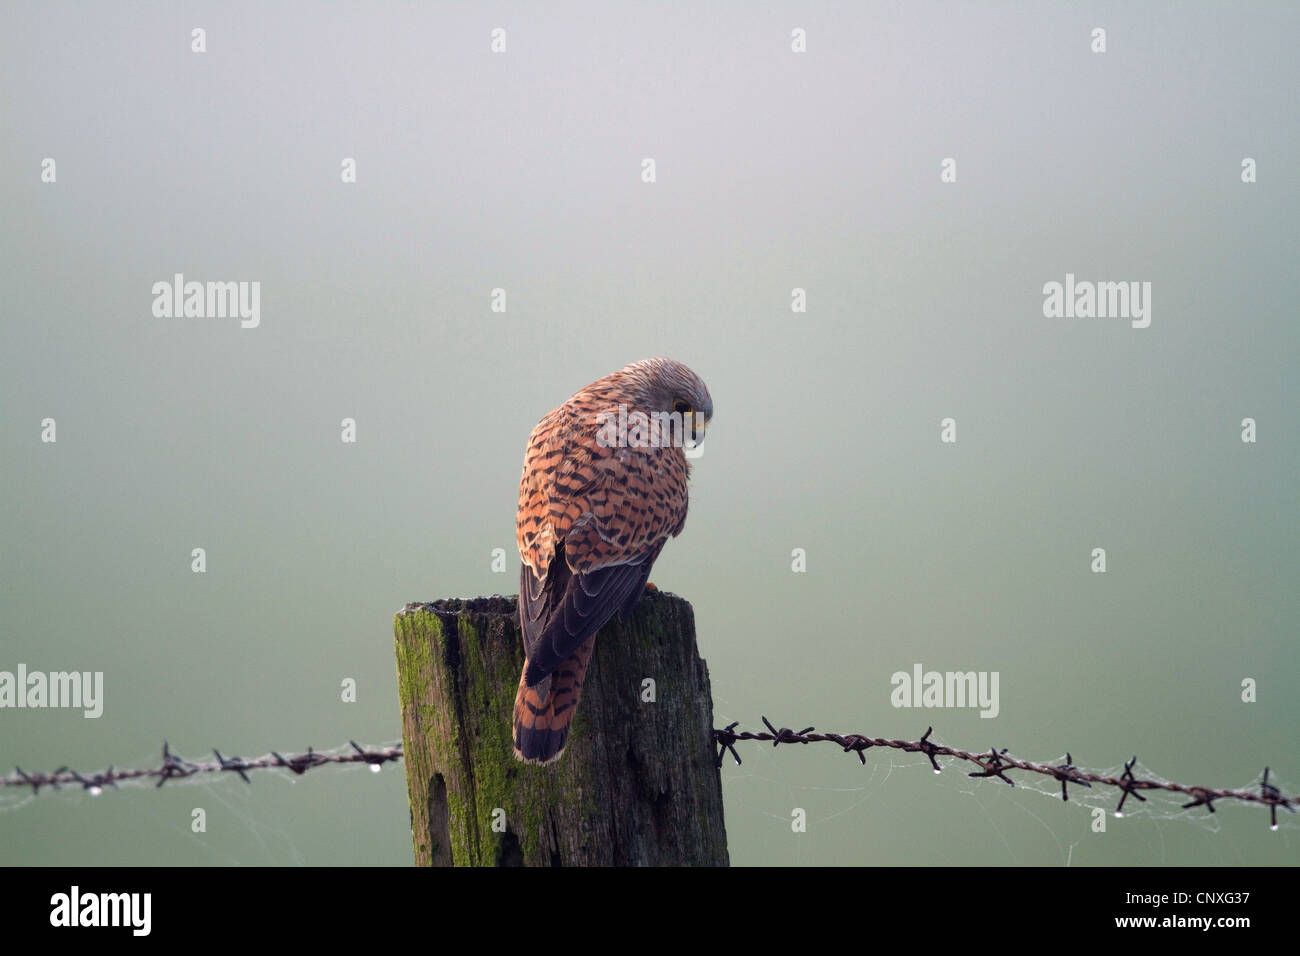 common kestrel (Falco tinnunculus), sitting on a wooden post in morning mist, Germany Stock Photo